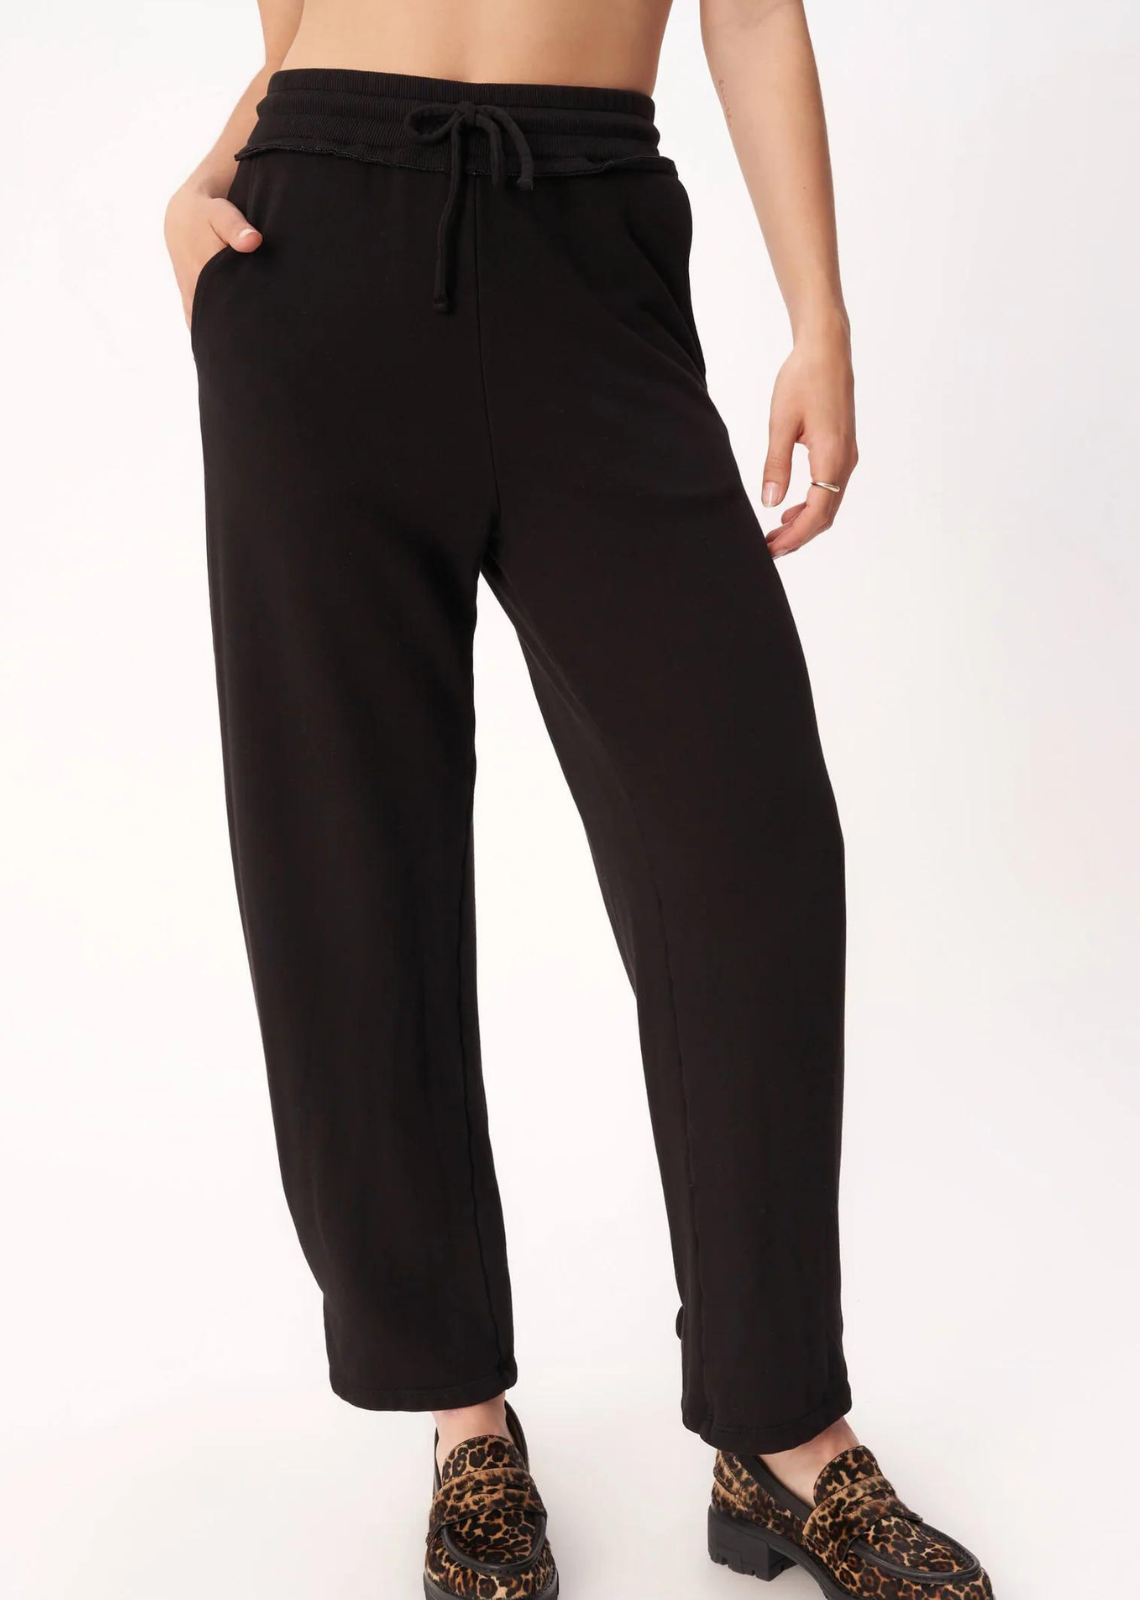 Pleated pants with elastic waist by Josiane Perron made in Canada